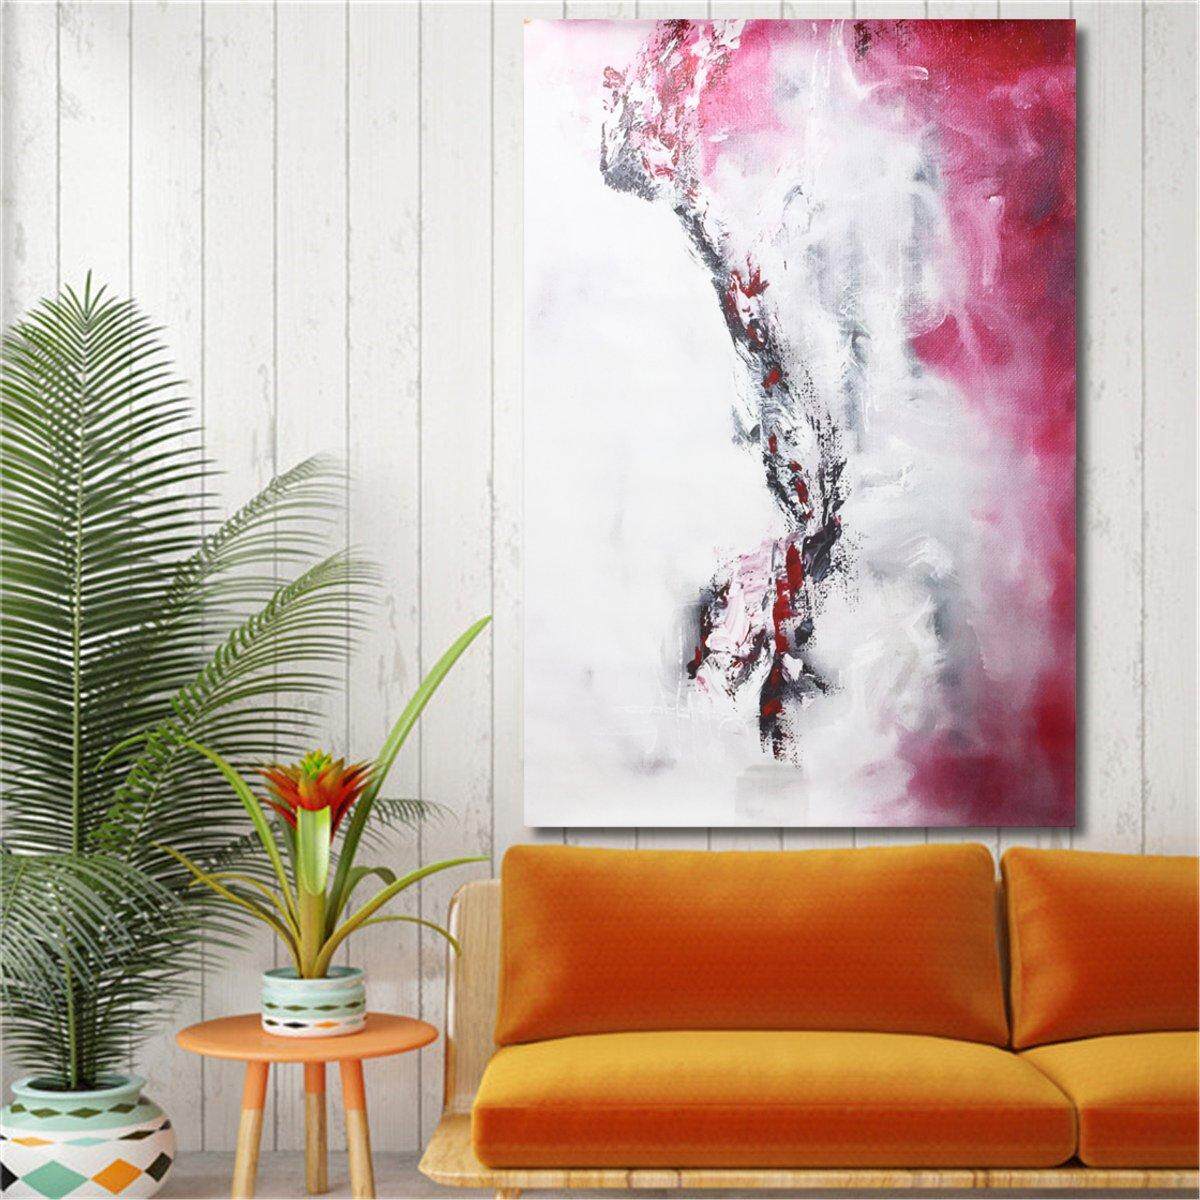 GUDI-Huge Fashion Hand Drawing Modern Abstract Painting Home Deco Canvas Art # 150x75cm